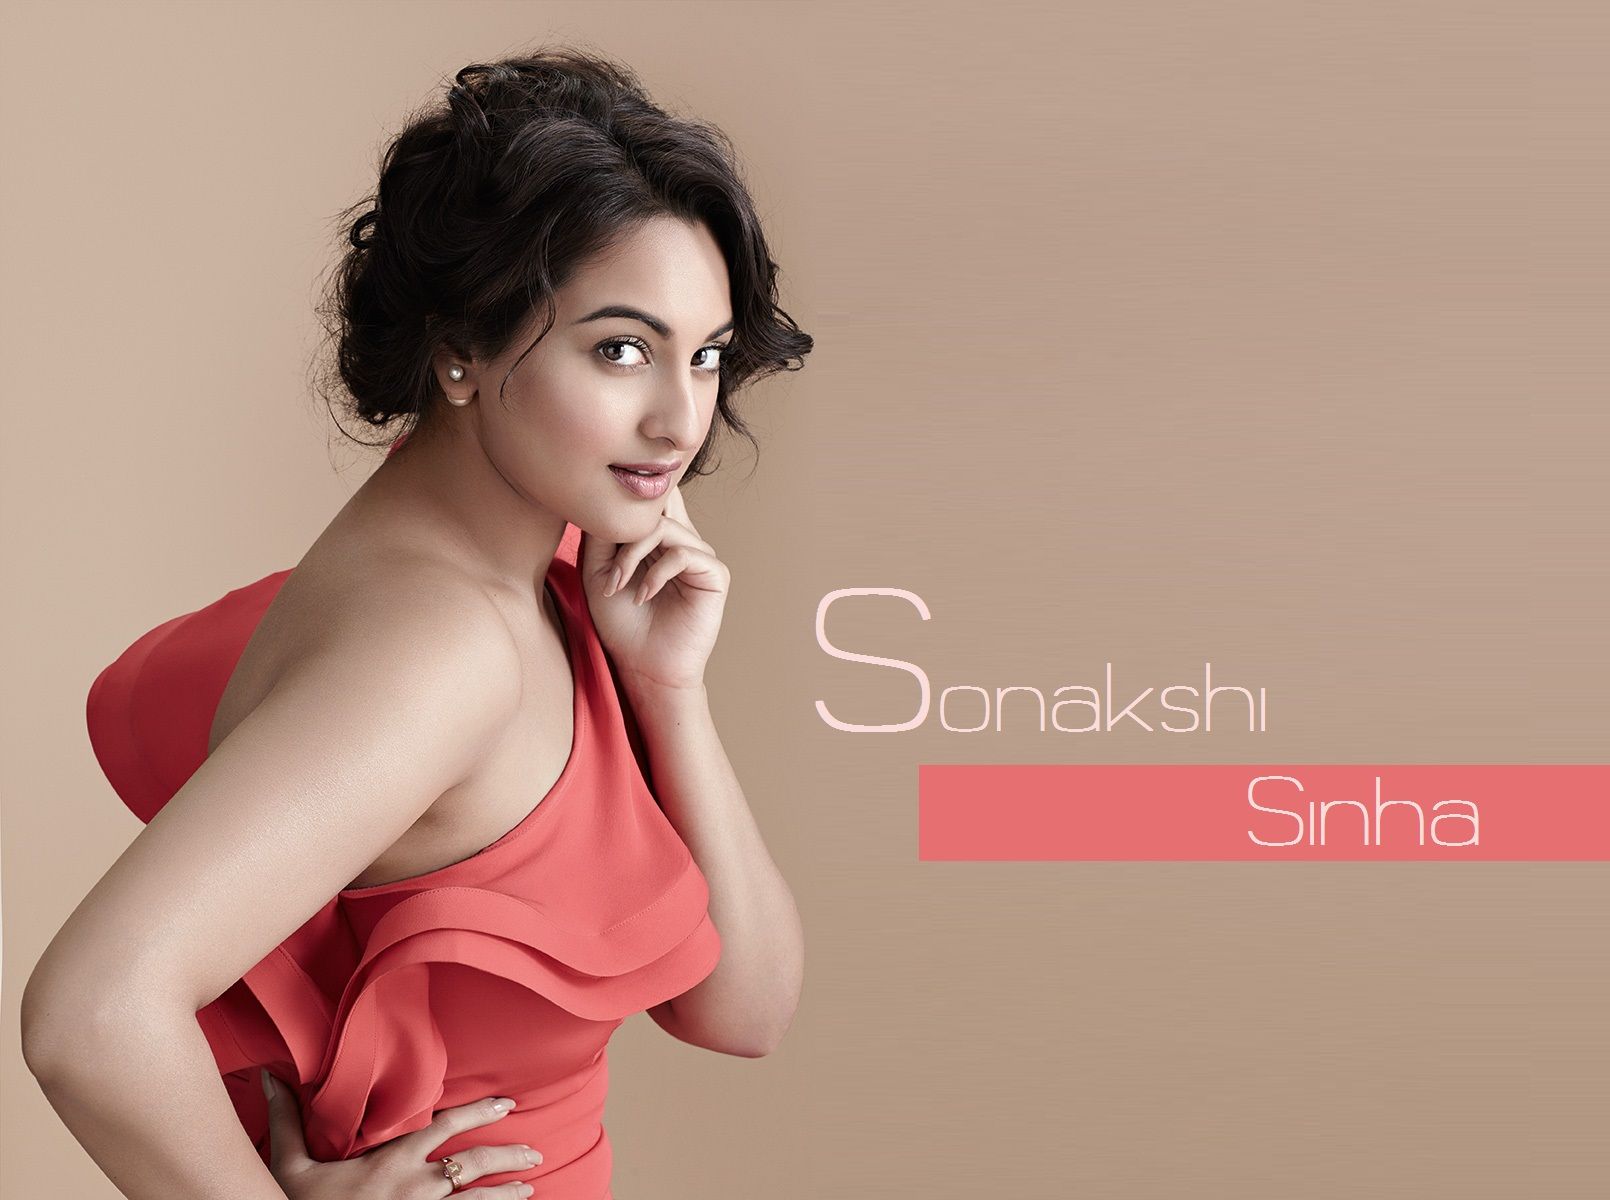 bollywood Actress sonakshi sinha | Get Latest Wallpapers